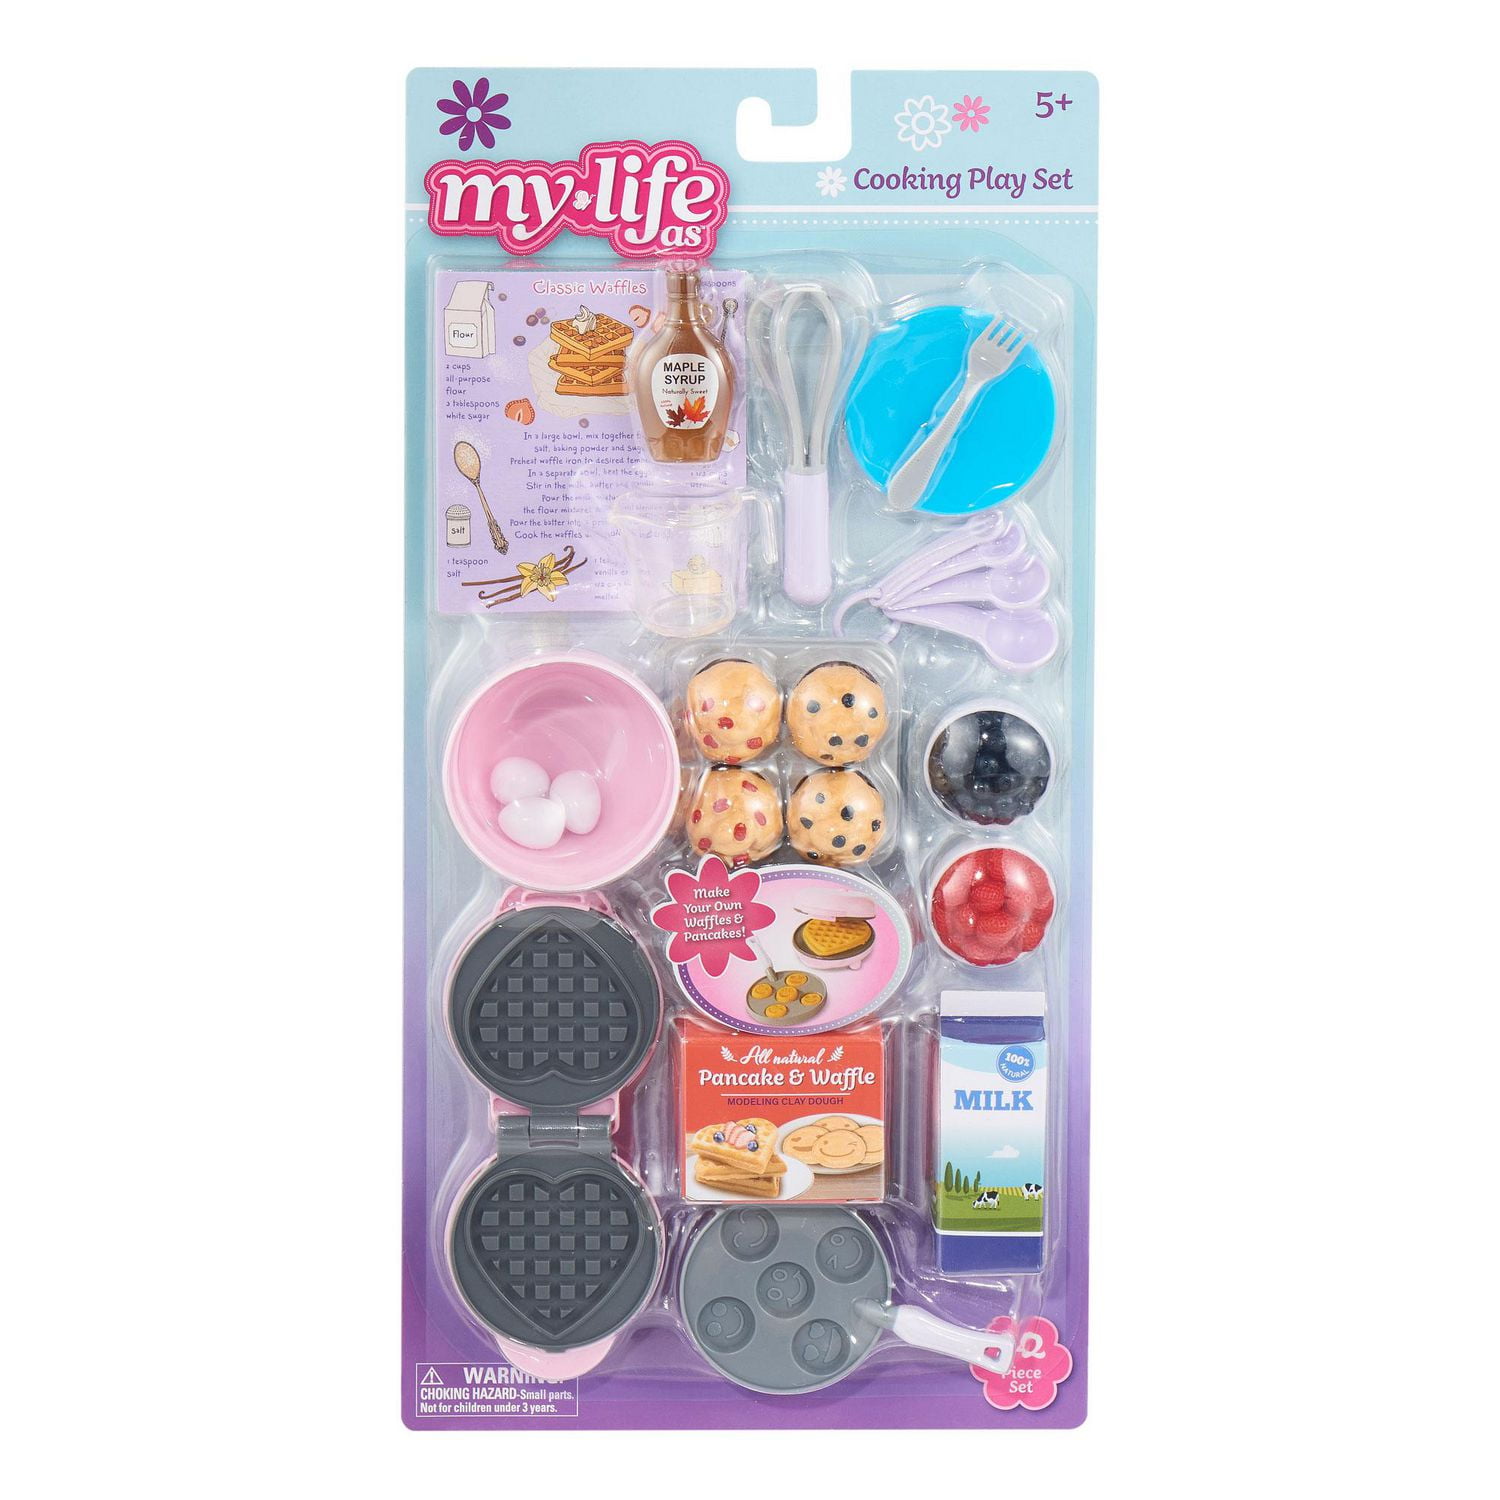 My Life As Cooking Play Set for 18“ Dolls, For cooking breakfast 